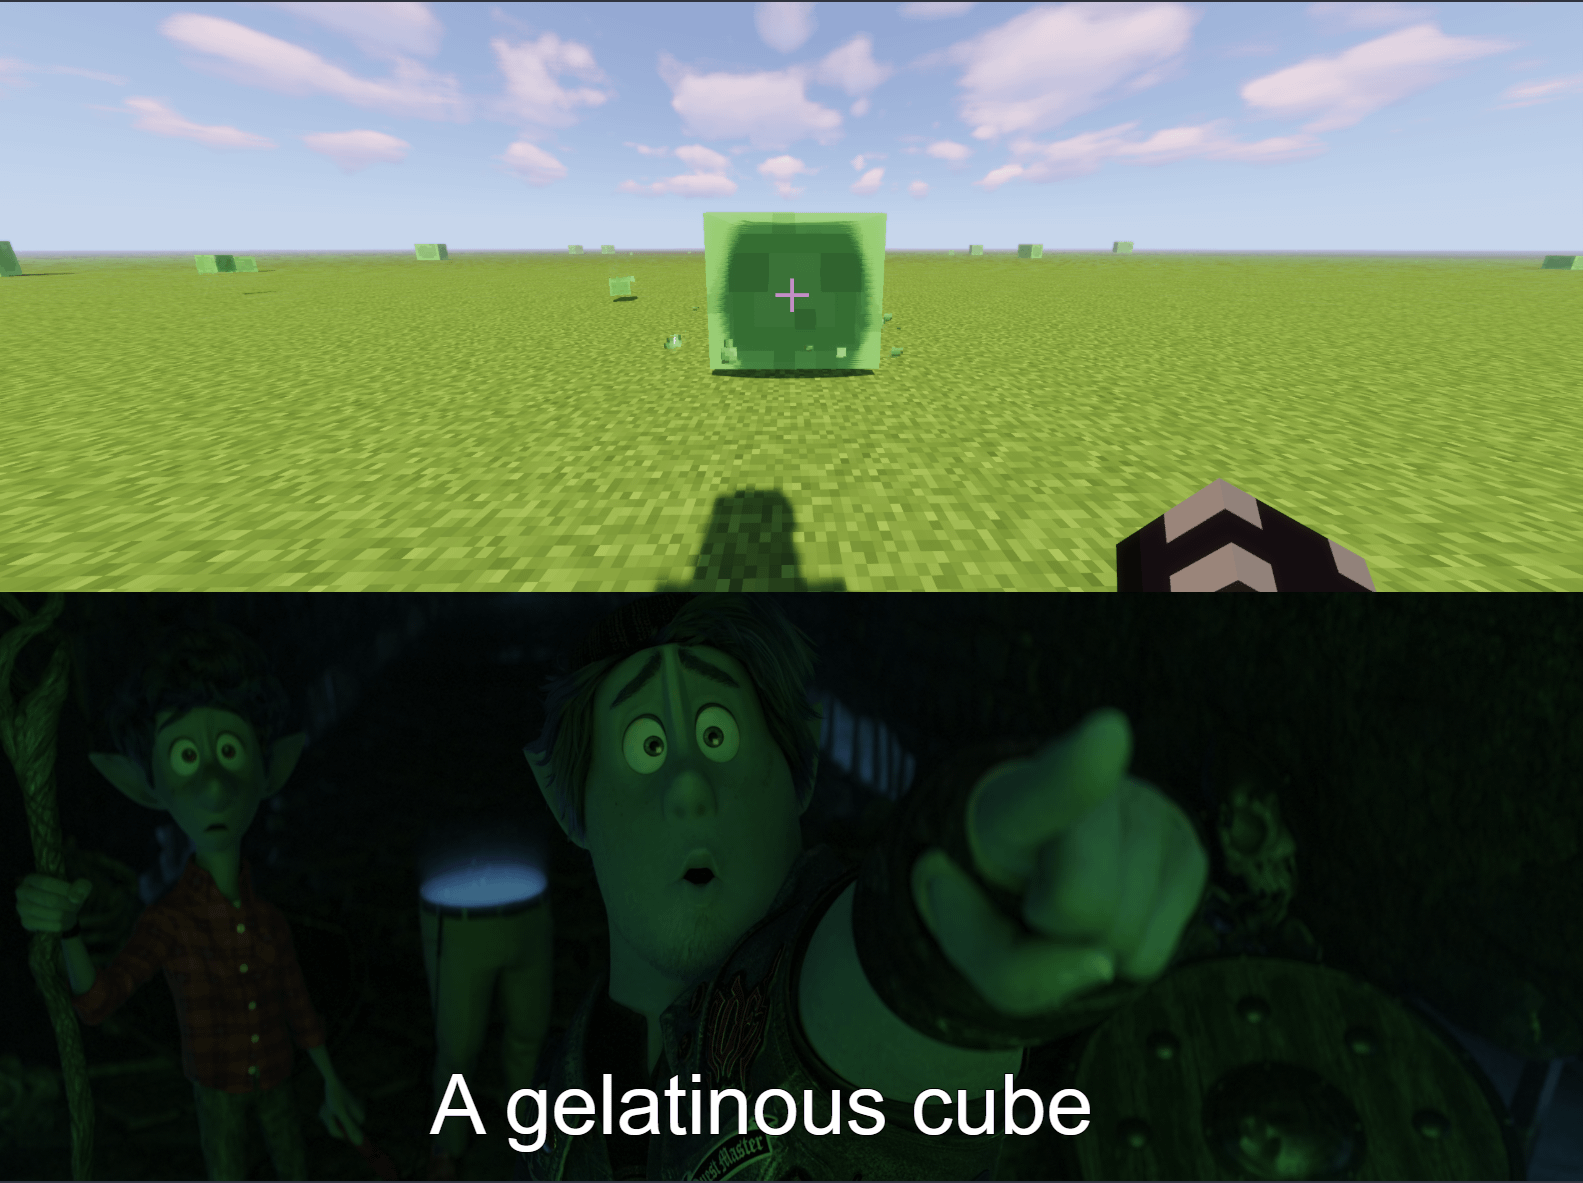 Minecraft Memes - As a dnd player it's what I thought when I saw these